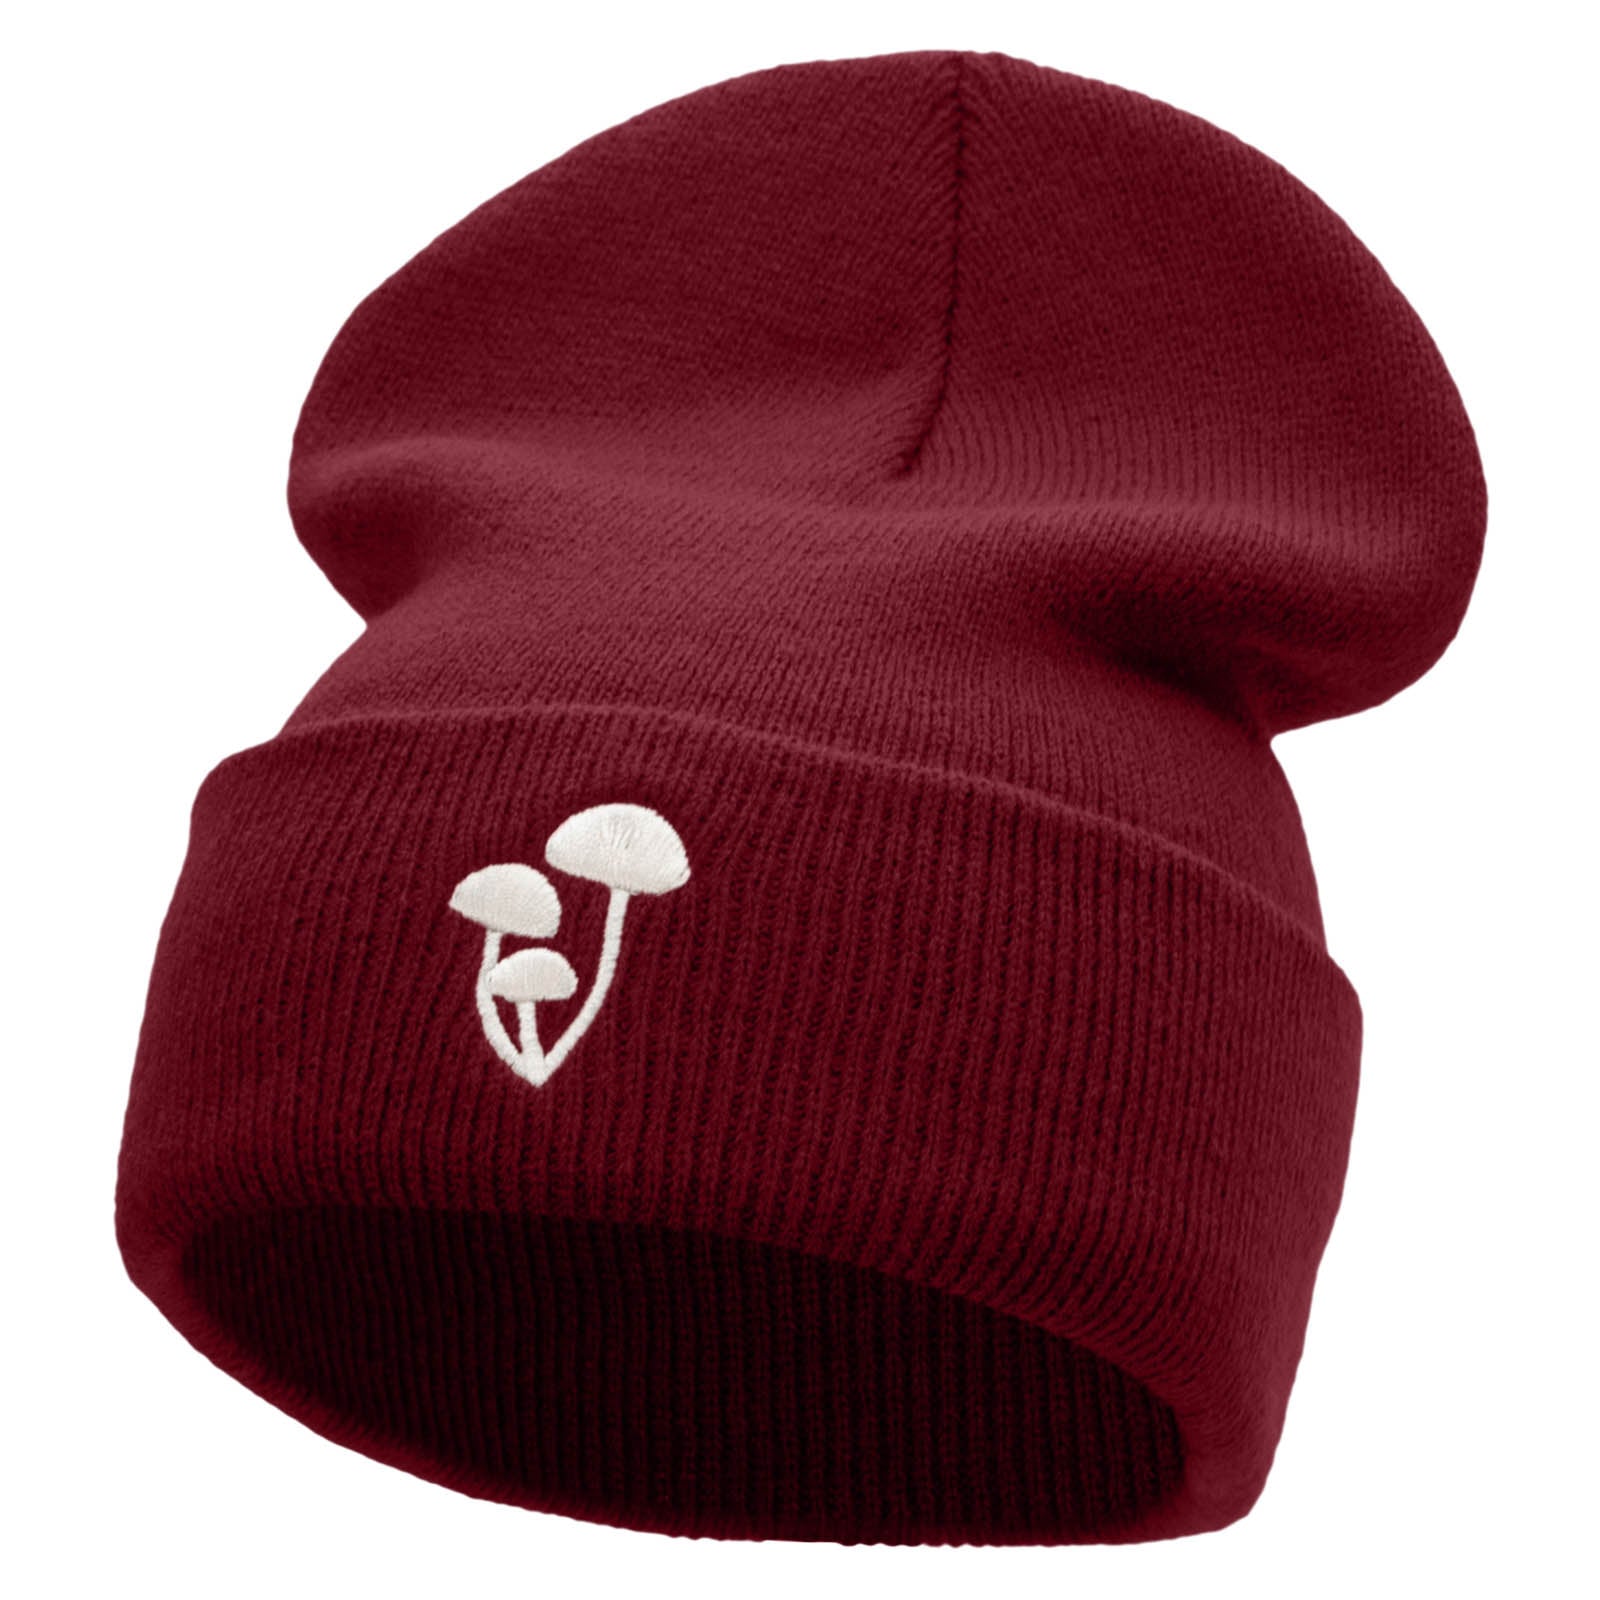 Beech Shrooms Embroidered 12 Inch Long Knitted Beanie - Maroon OSFM